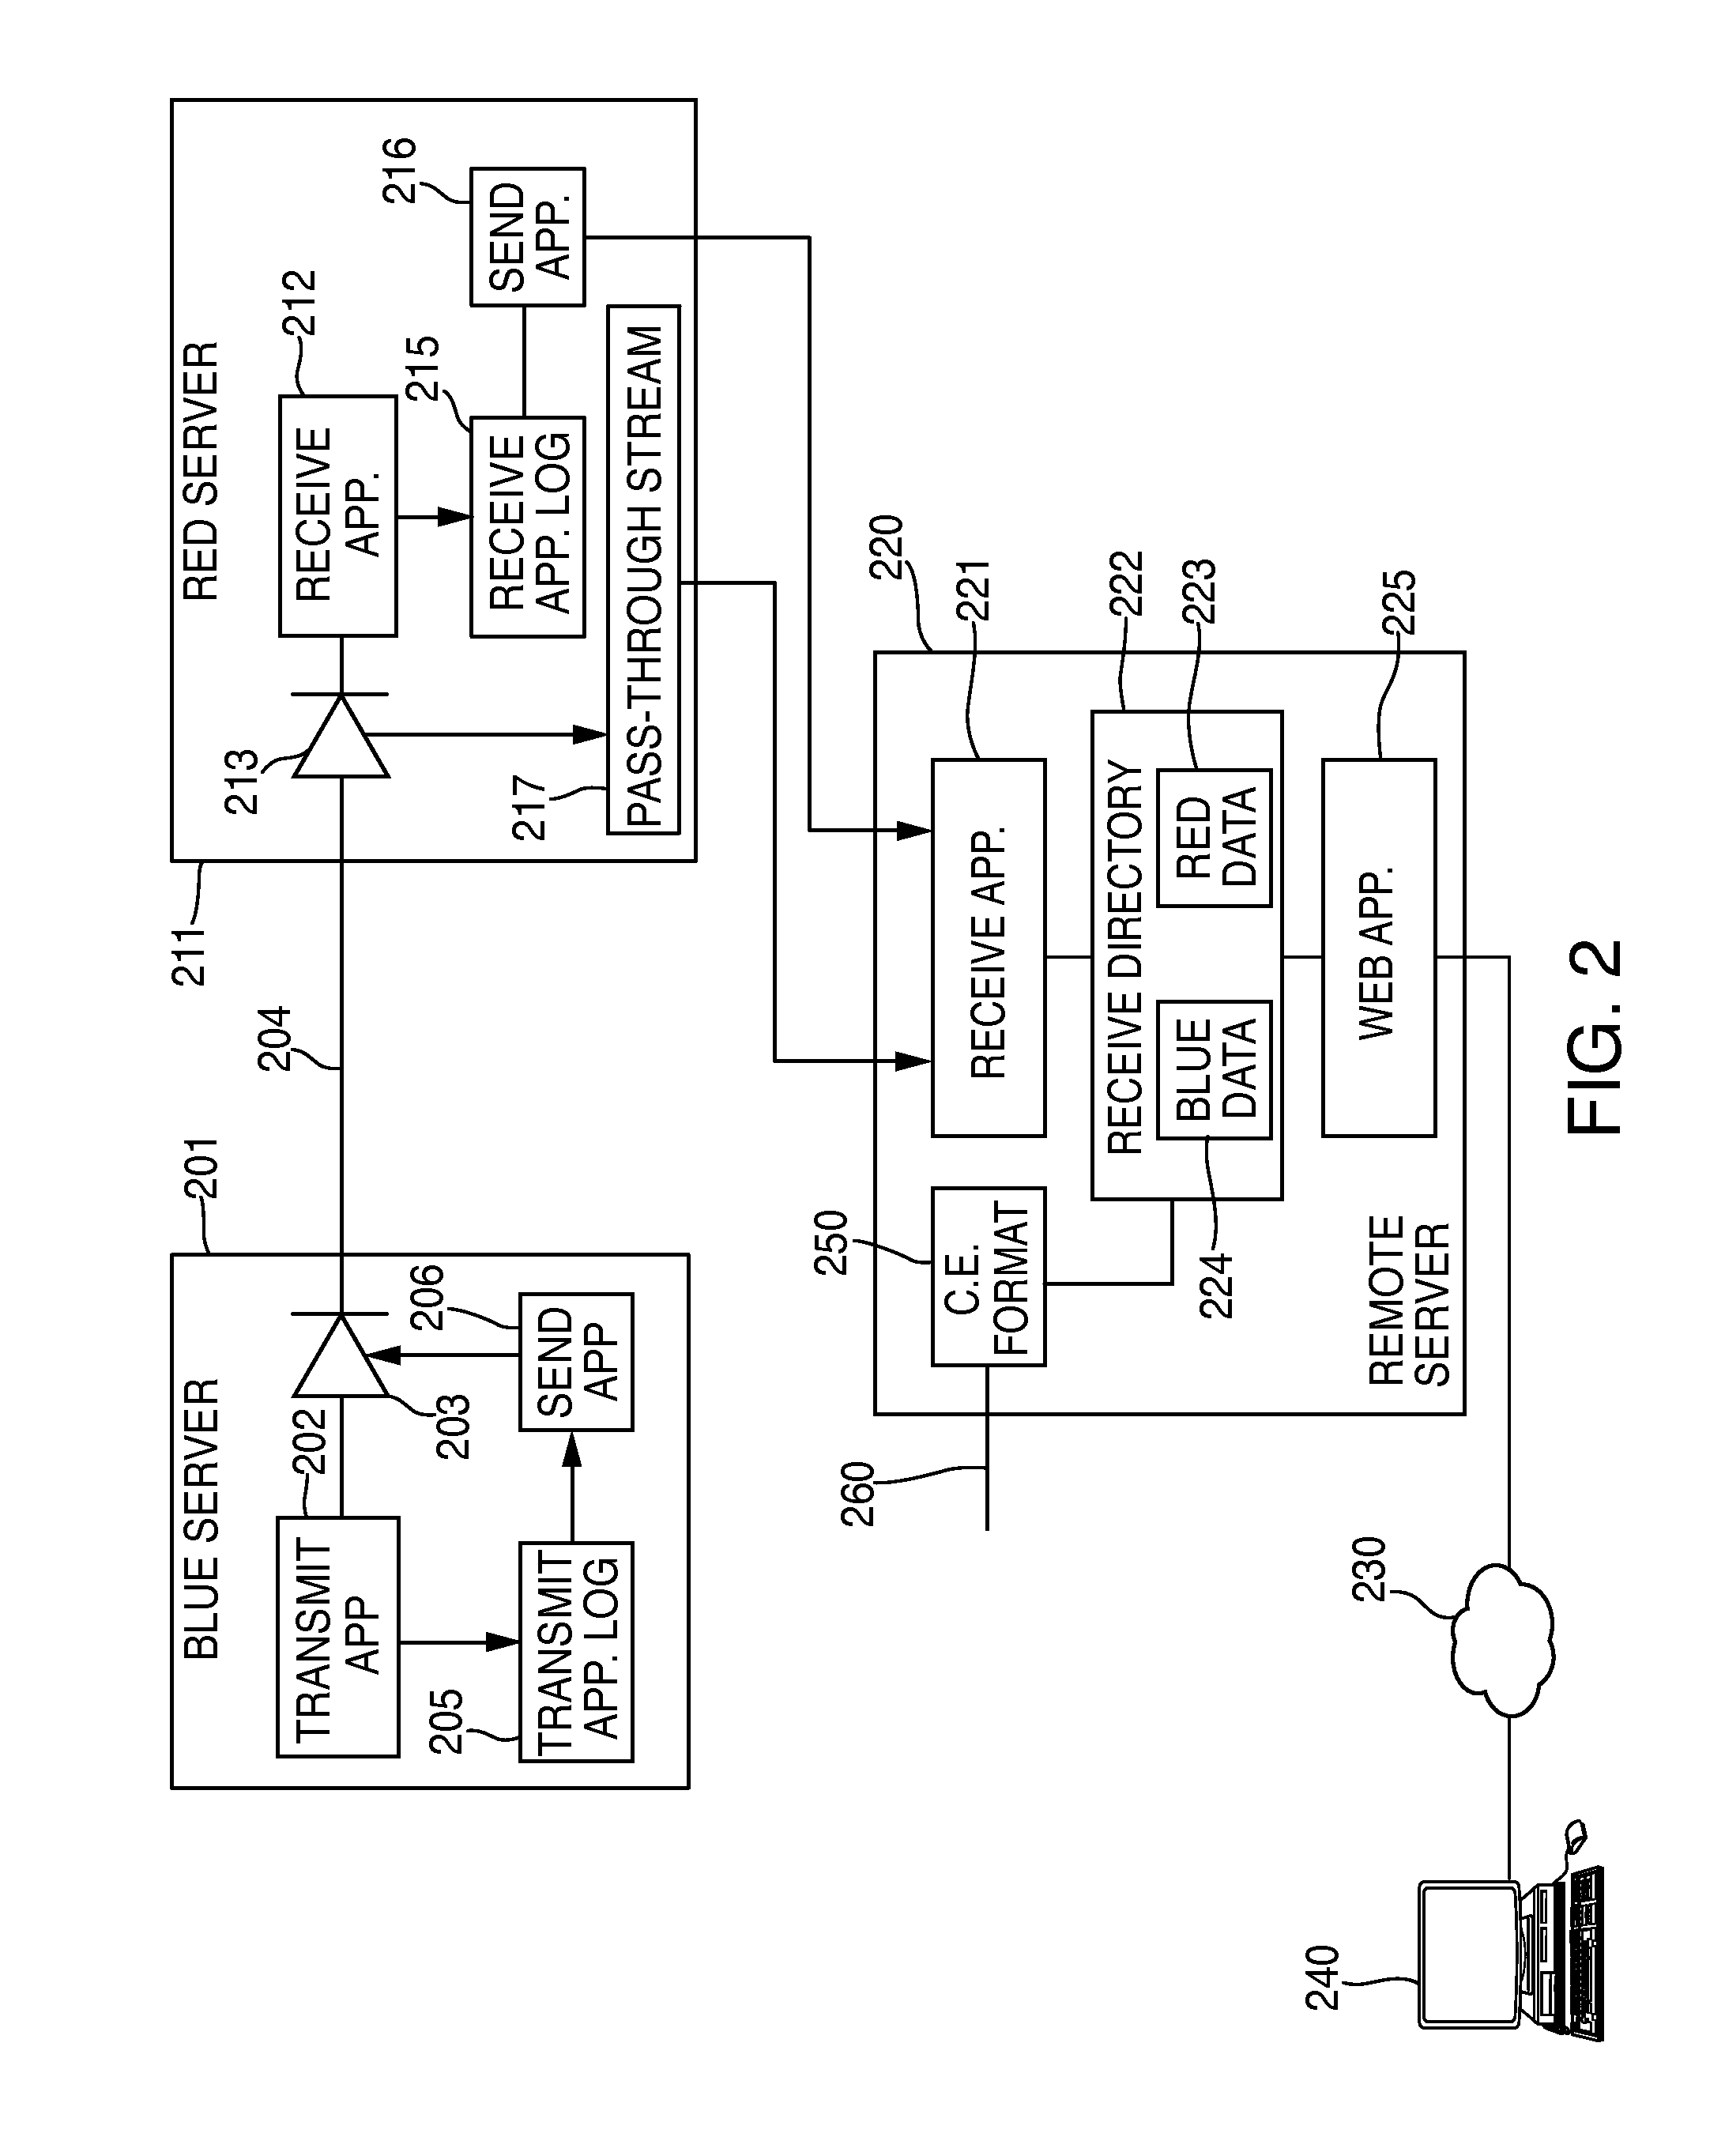 Method and apparatus for data transfer reconciliation